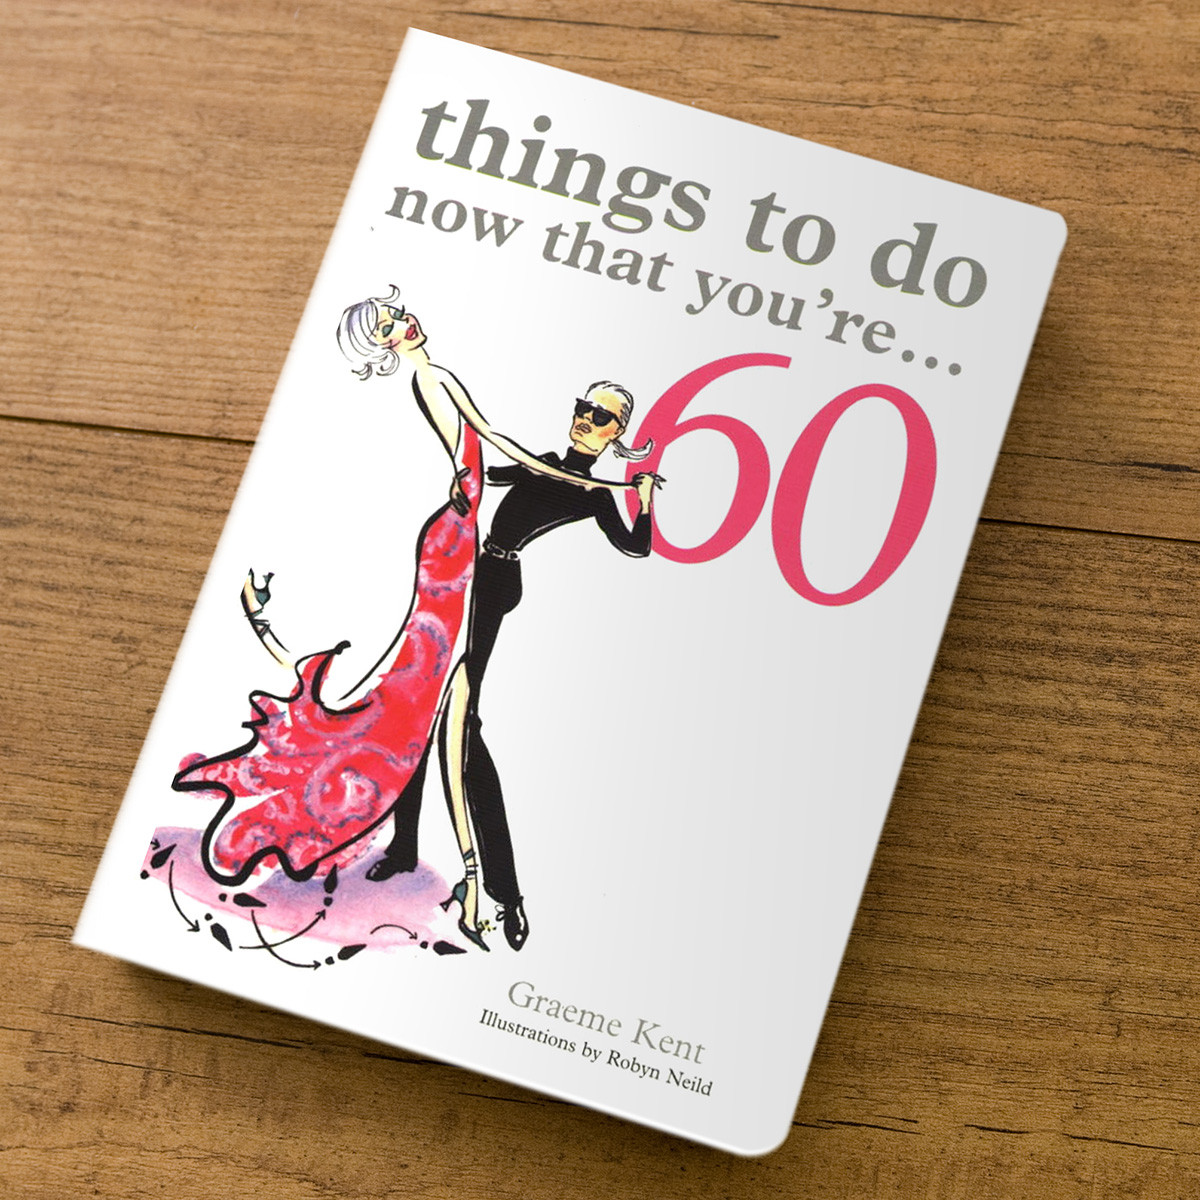 60th Birthday Gifts
 Things To Do Now That You re 60 Gift Book 60th